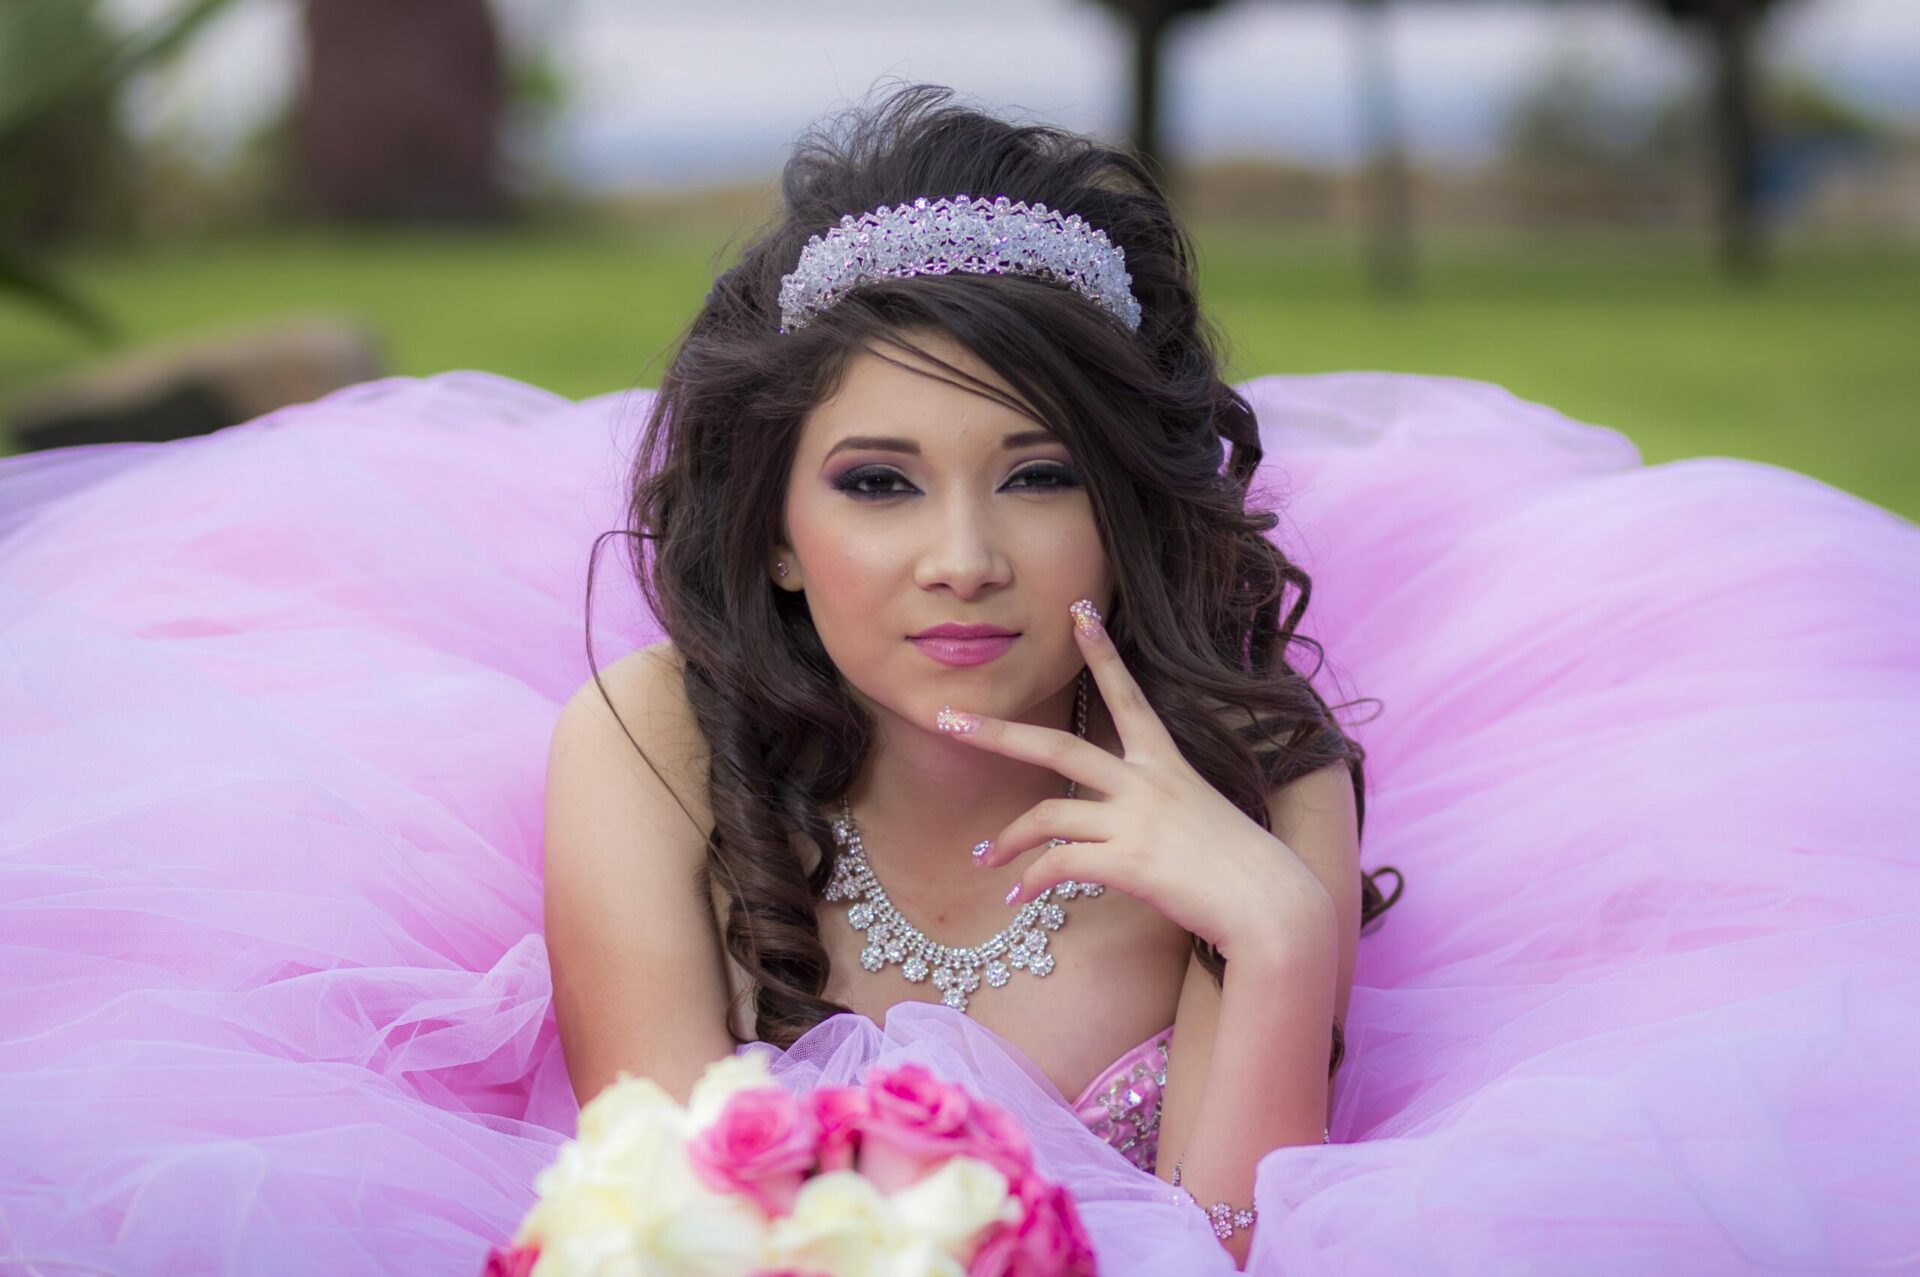 What To Wear To A Quinceanera